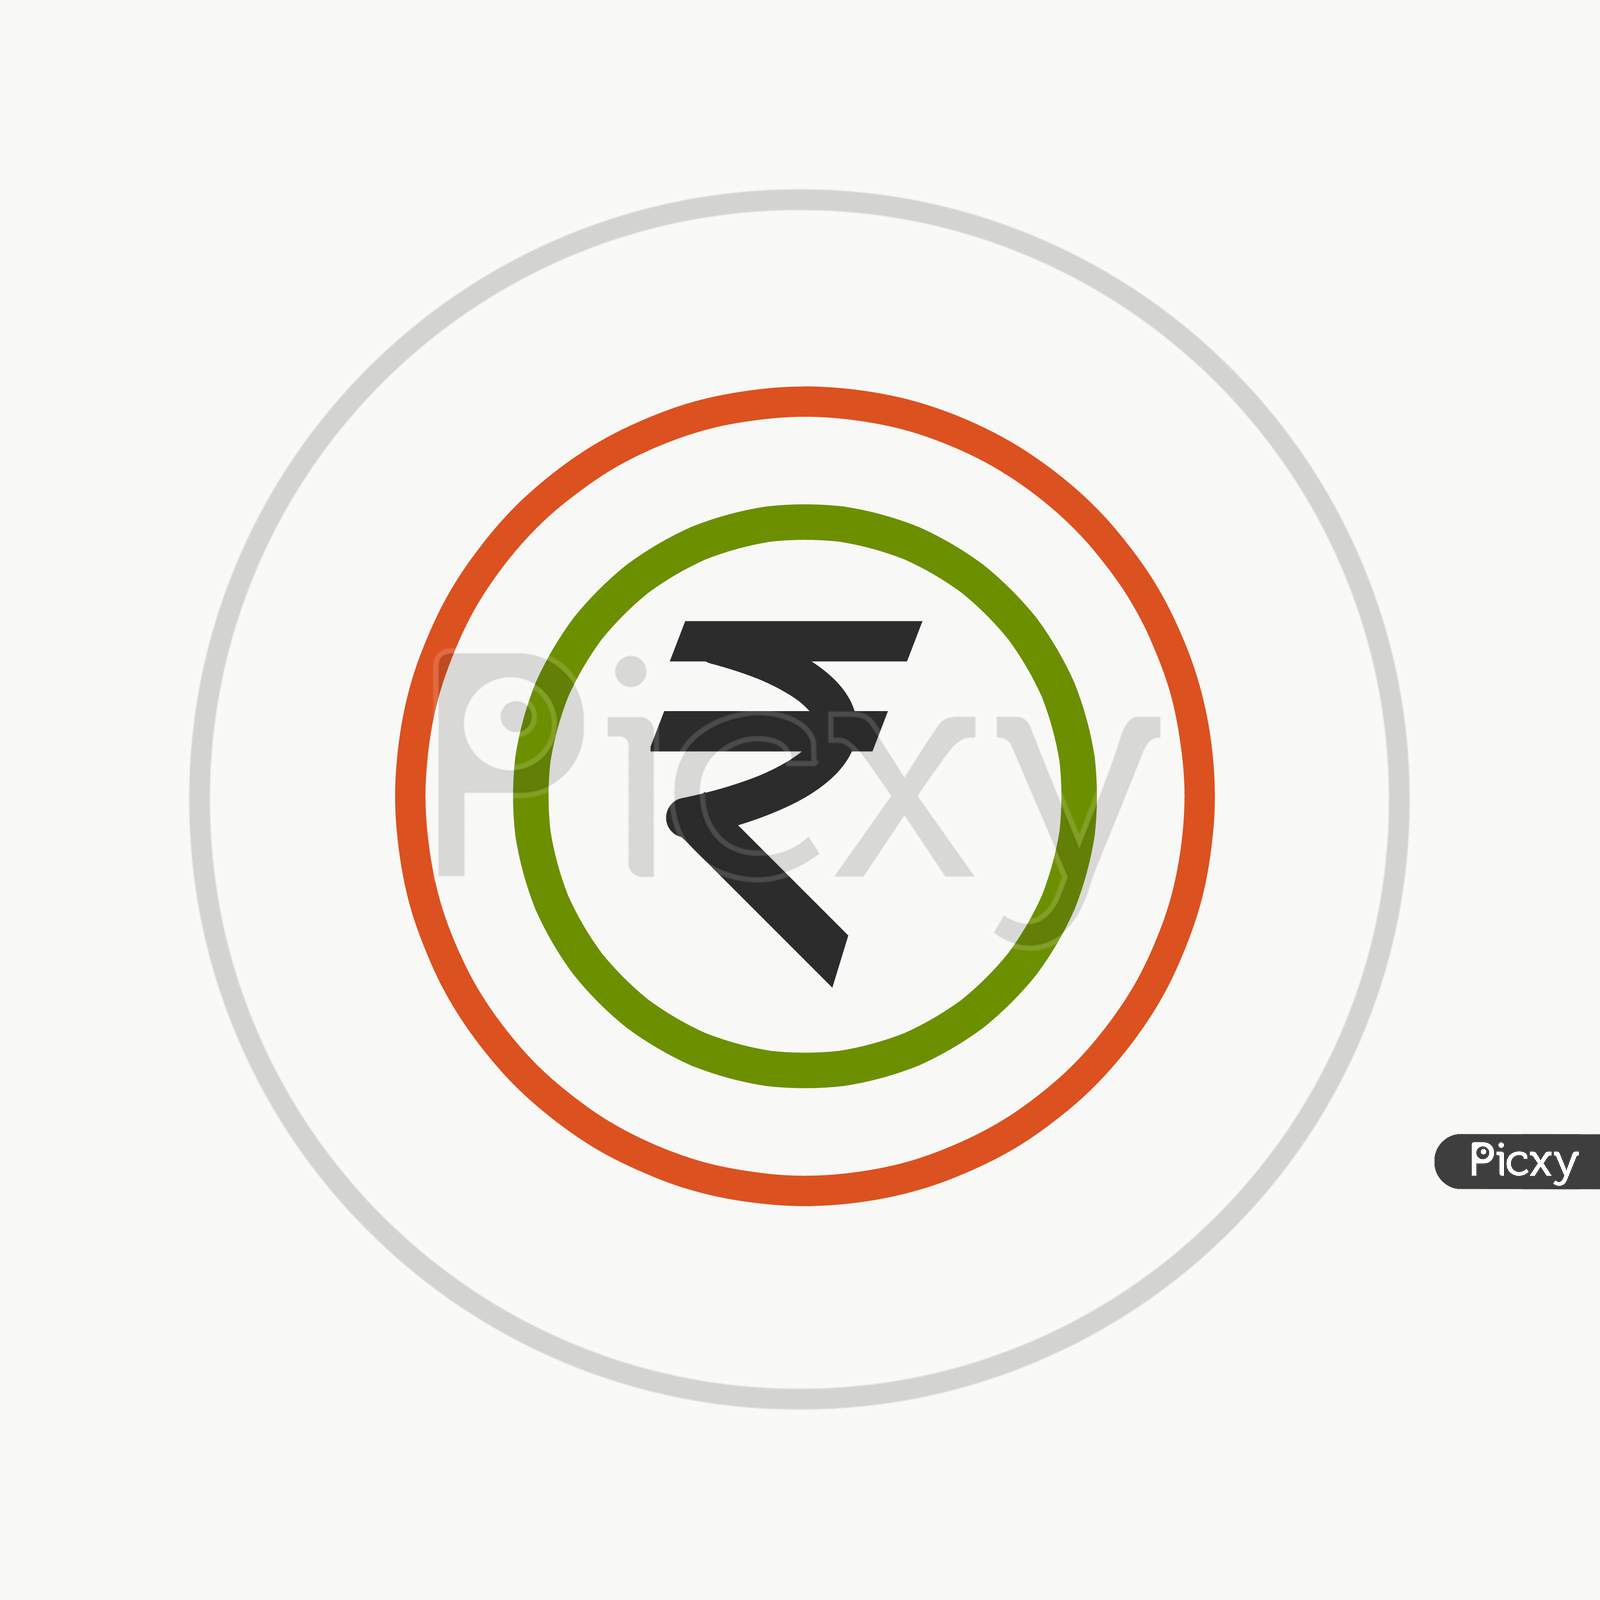 Black Color Rupee Sign In Indian Color In Circle